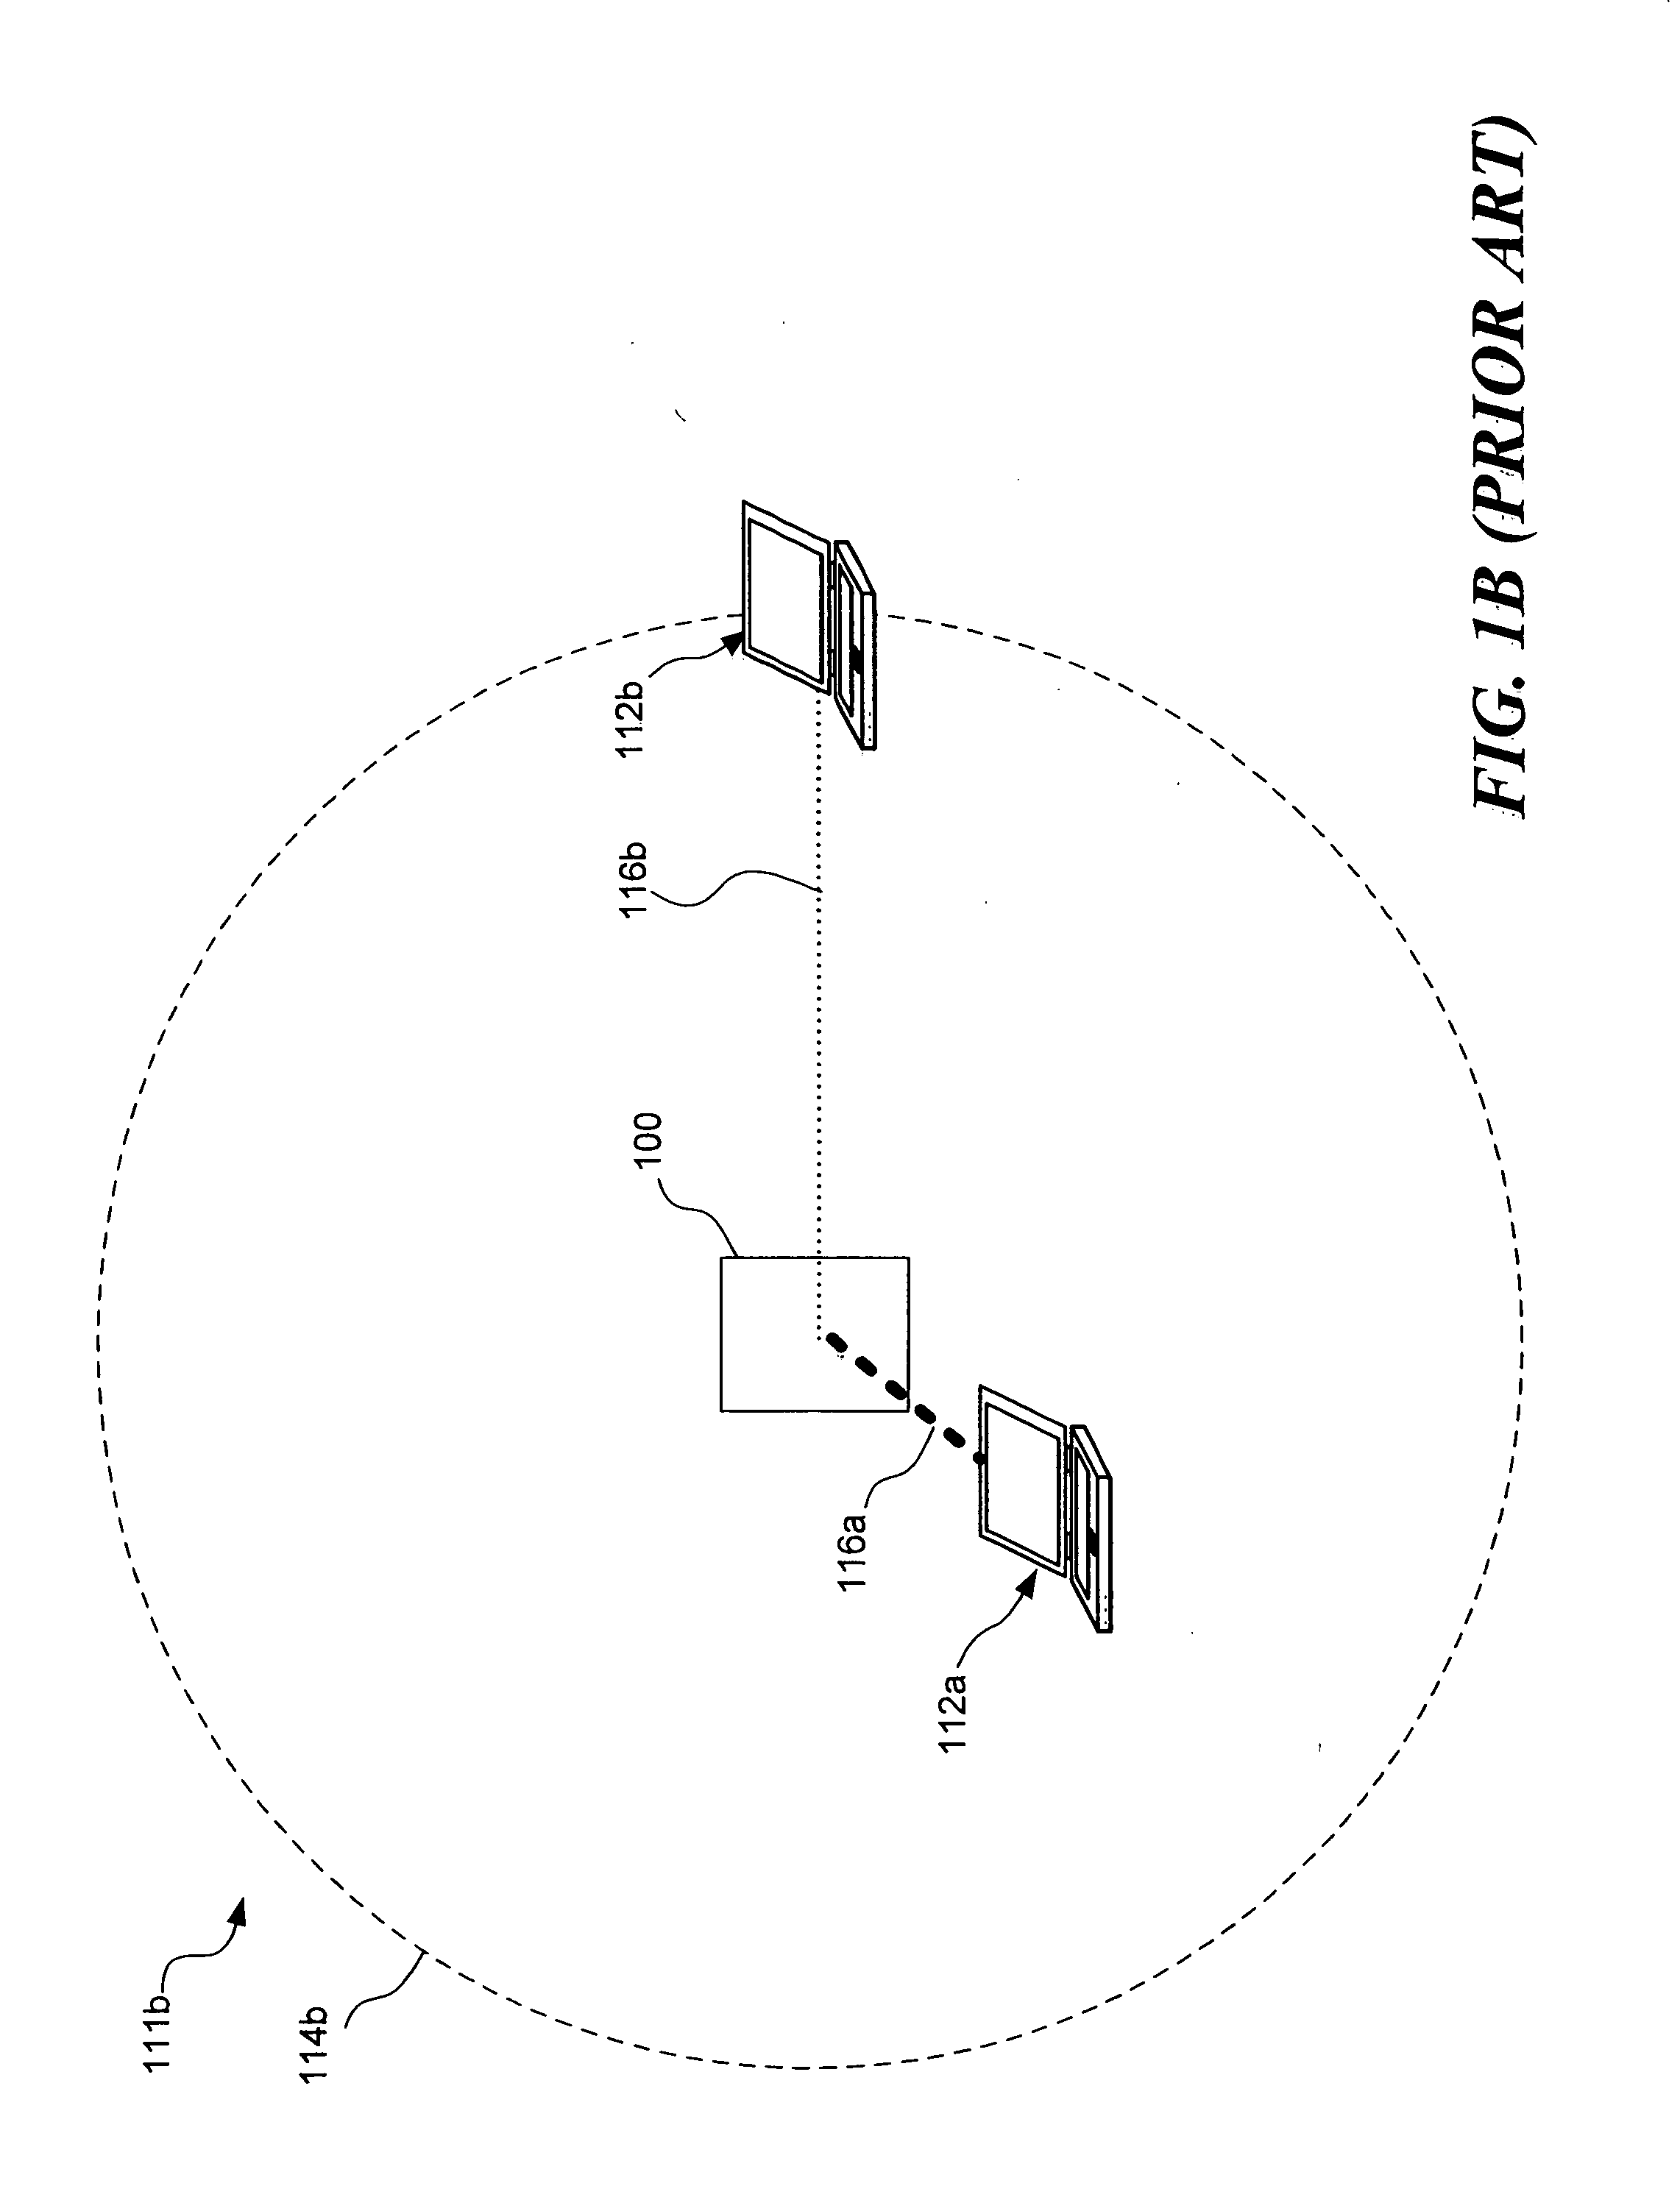 Multi-access system and method using multi-sectored antenna